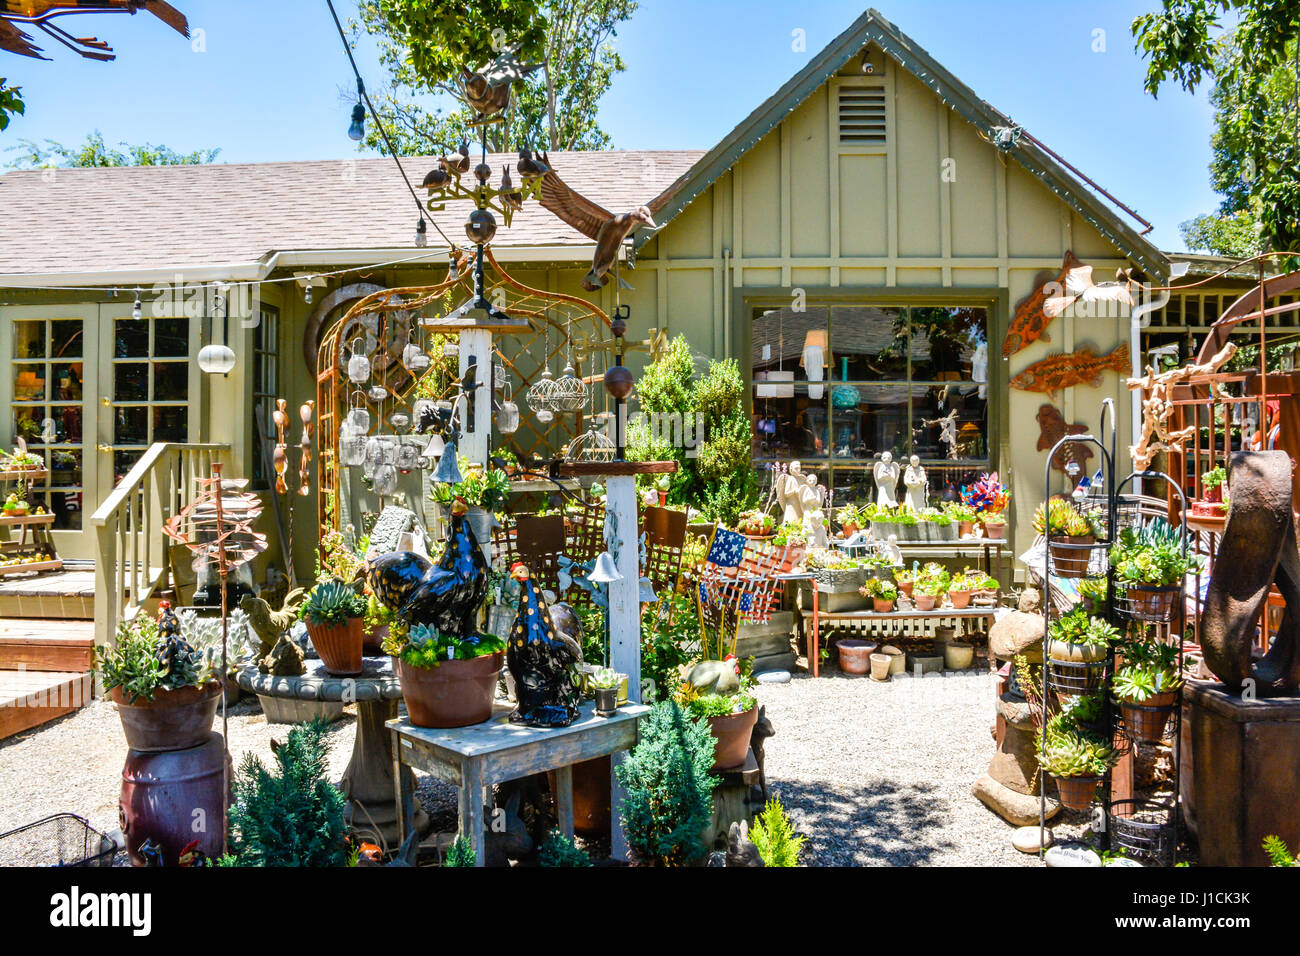 The whimsical collection of treasures at J. Woeste in Los Olivos, CA include unusual garden art and home decor in the heart of Santa Ynez Wine Country Stock Photo